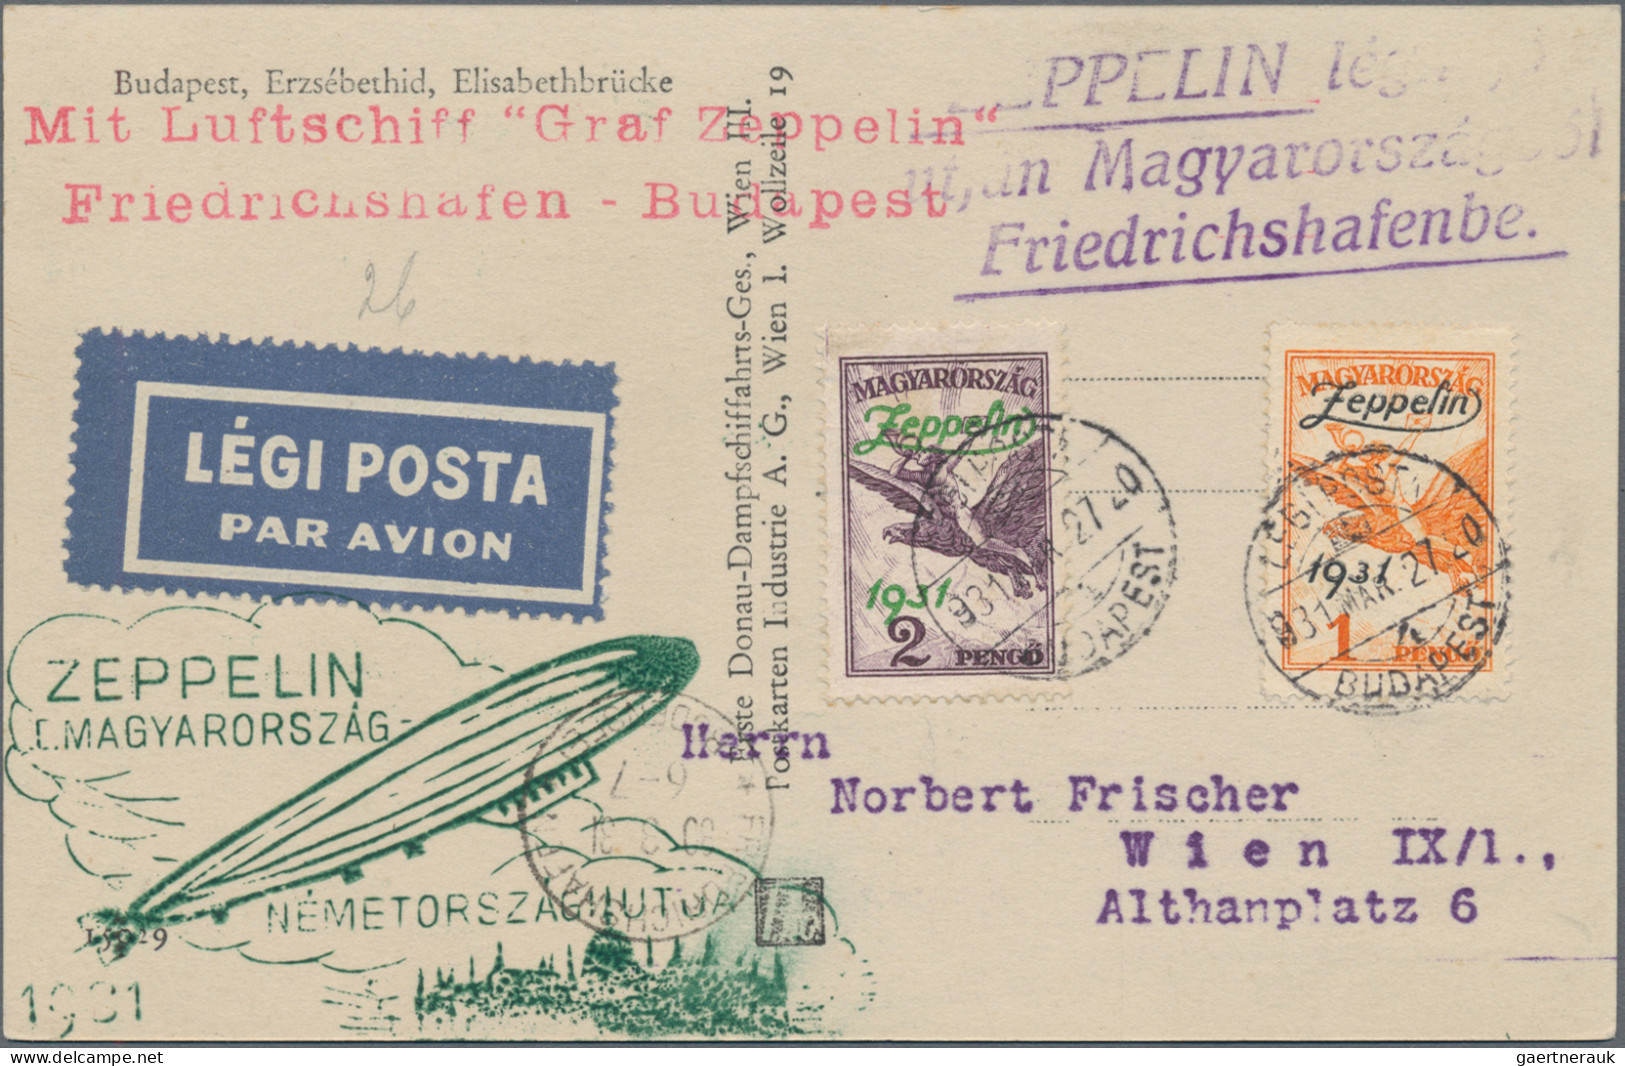 Zeppelin Mail - Europe: 1927/31, three postcards and one cover, including 1927 a